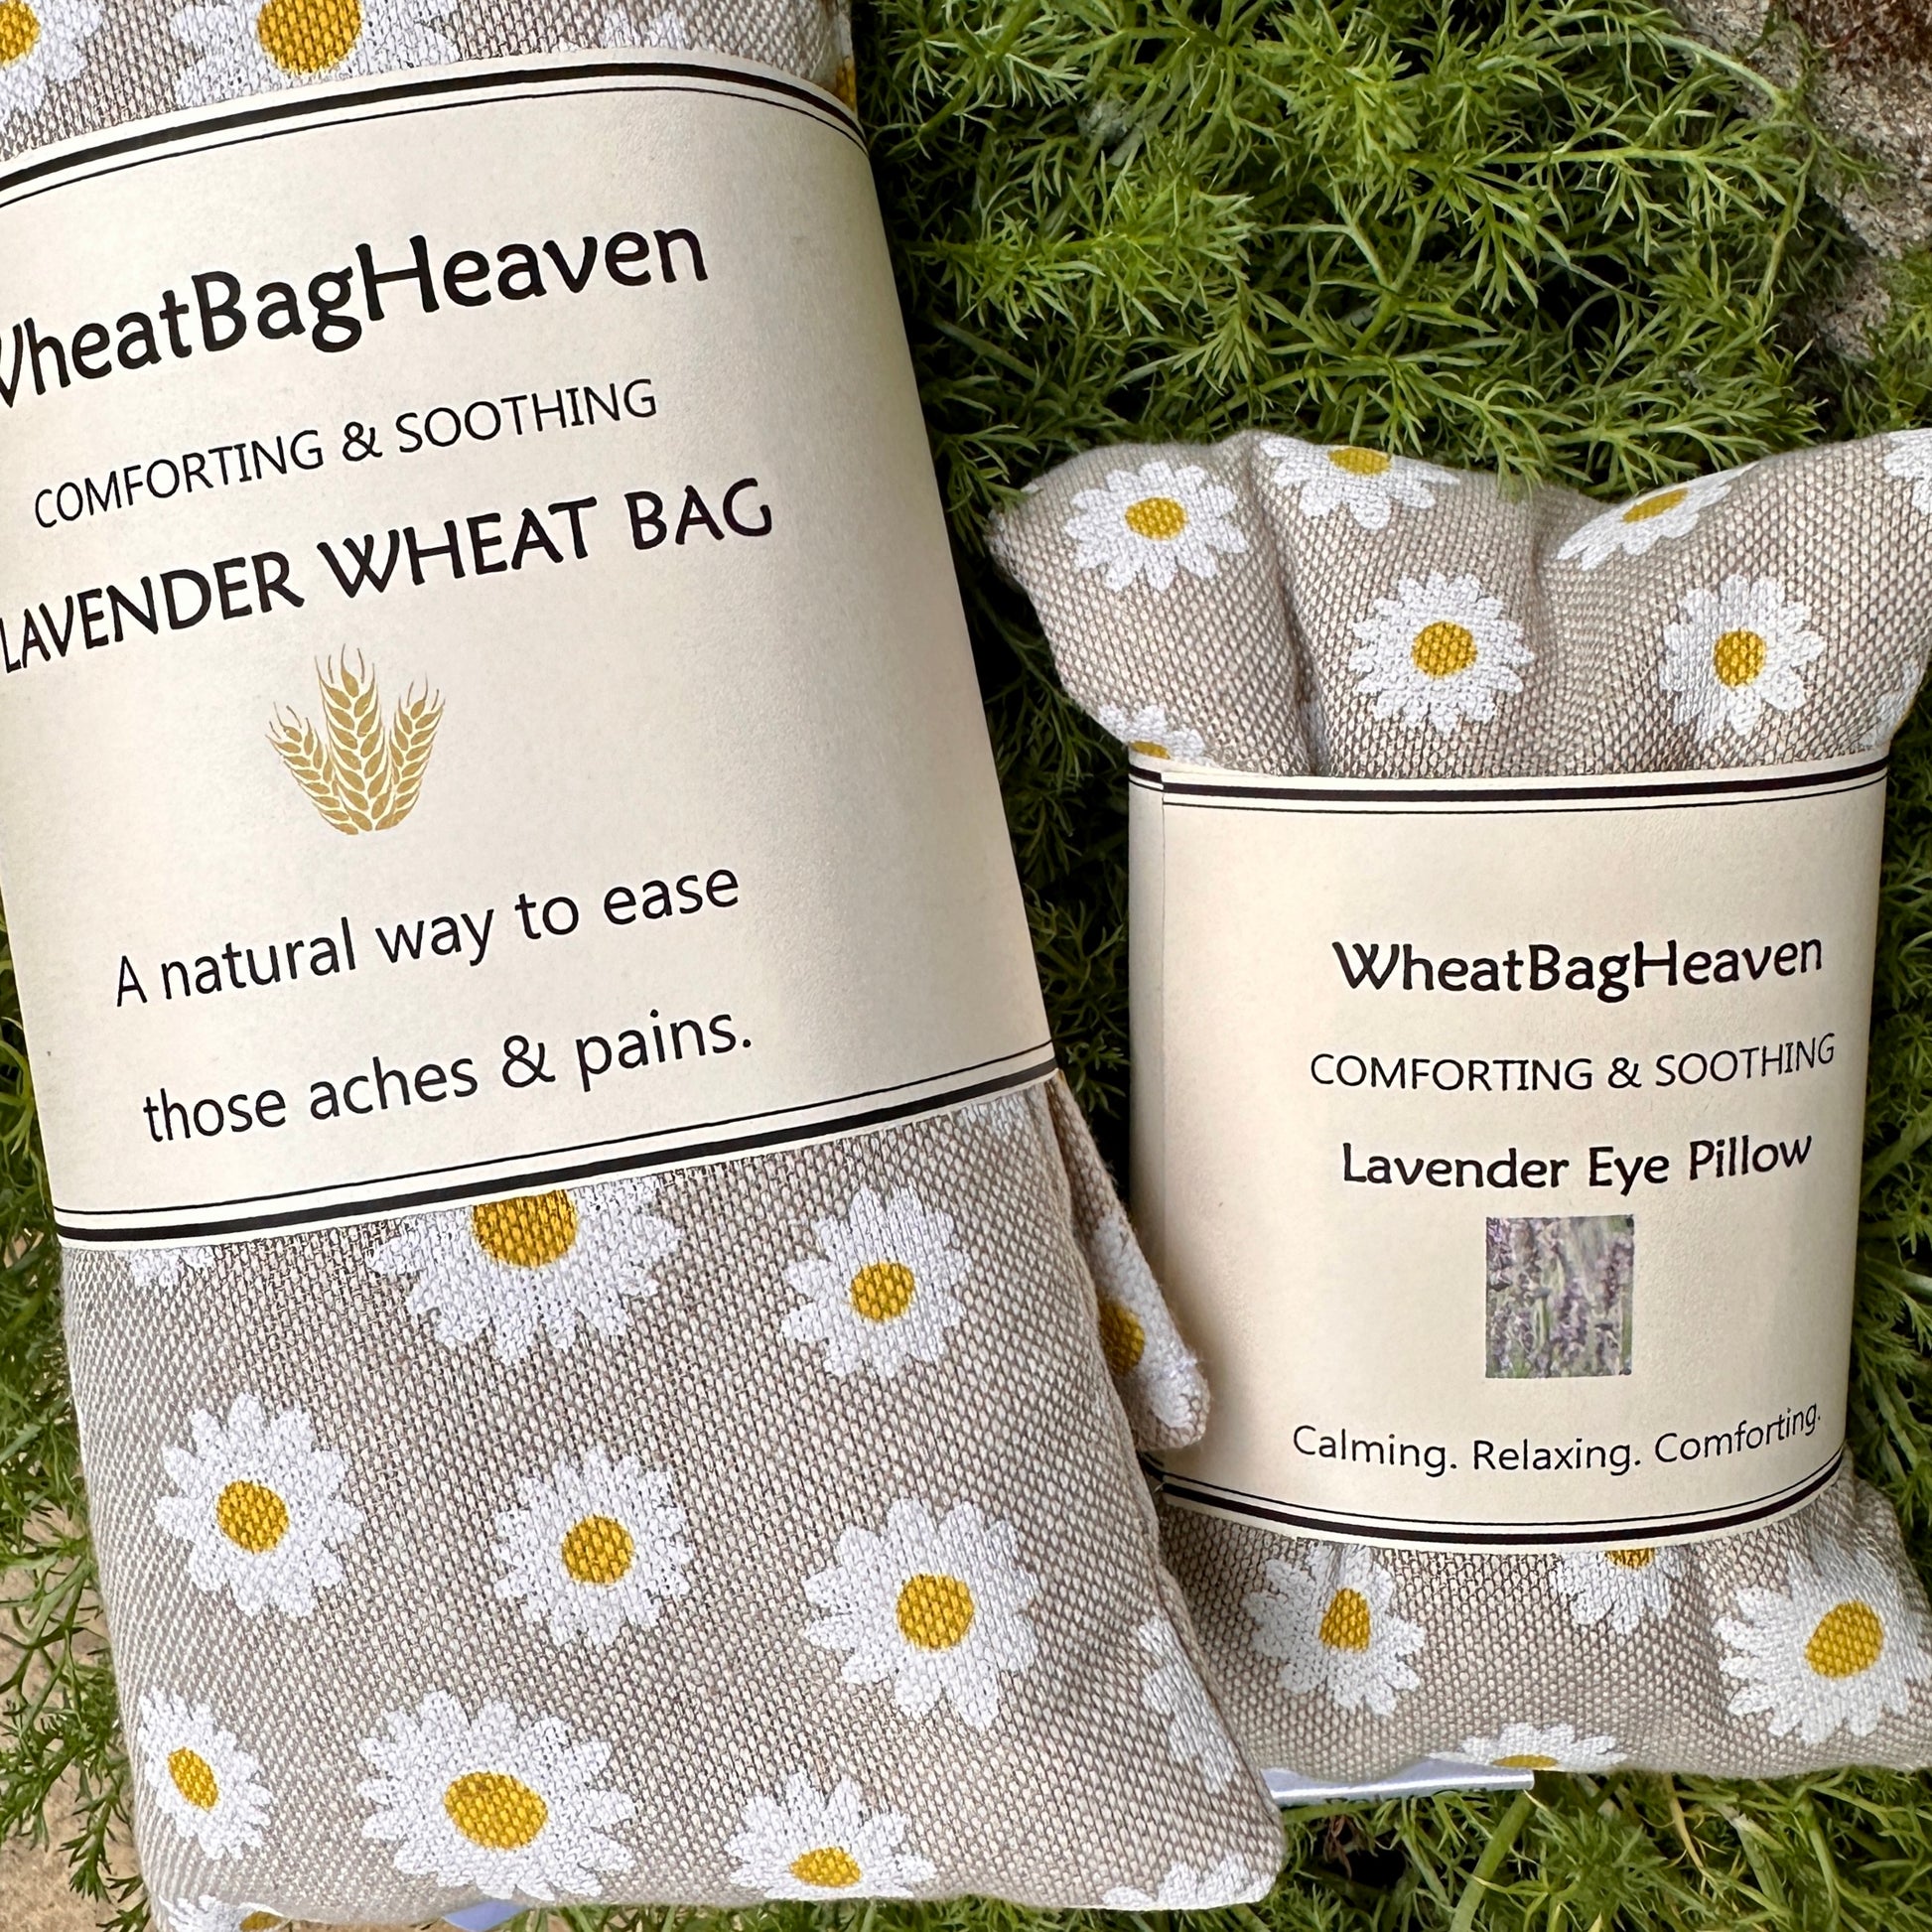  the perfect wellbeing gift, daisy printed lavender scented wheat bag and eye pillow combination, ready to gift holistic solutions for self care 